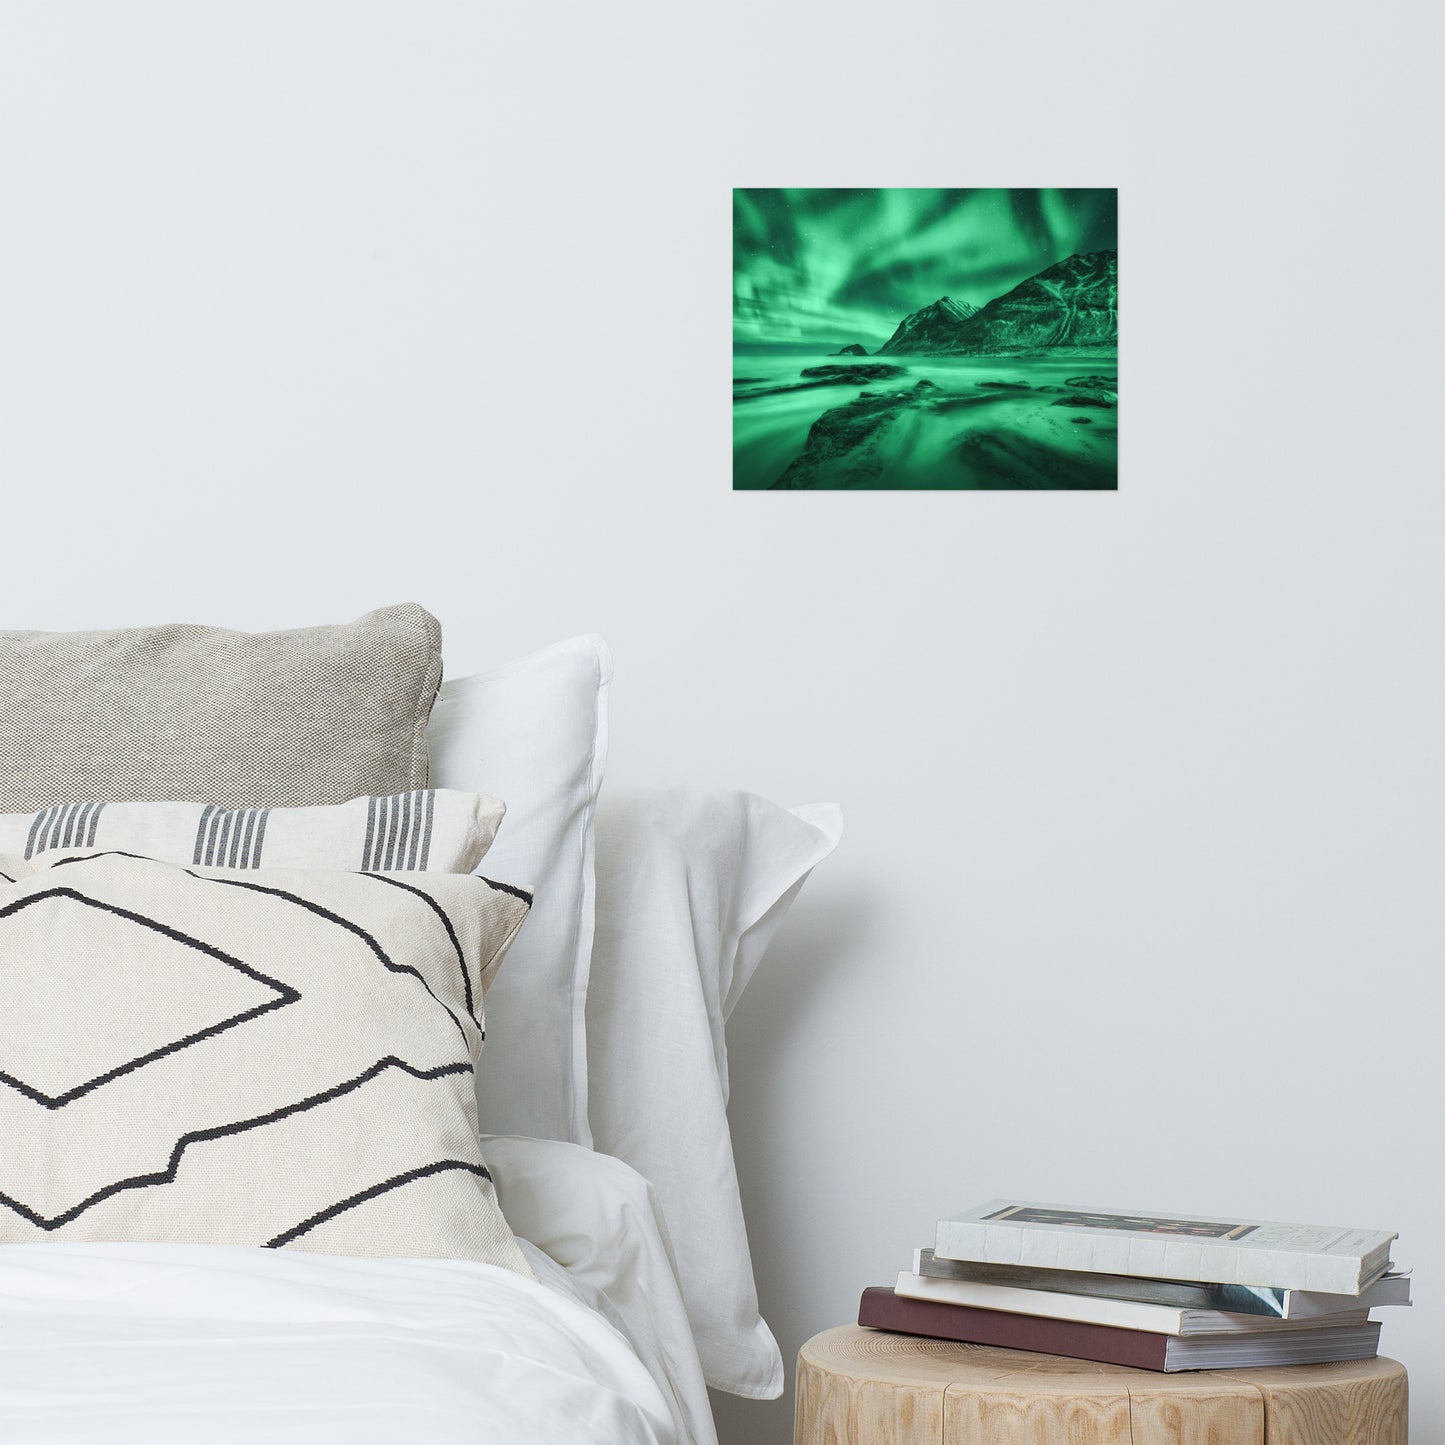 Green Northern Lights and Mountain Coast Landscape Photo Loose Wall Art Prints